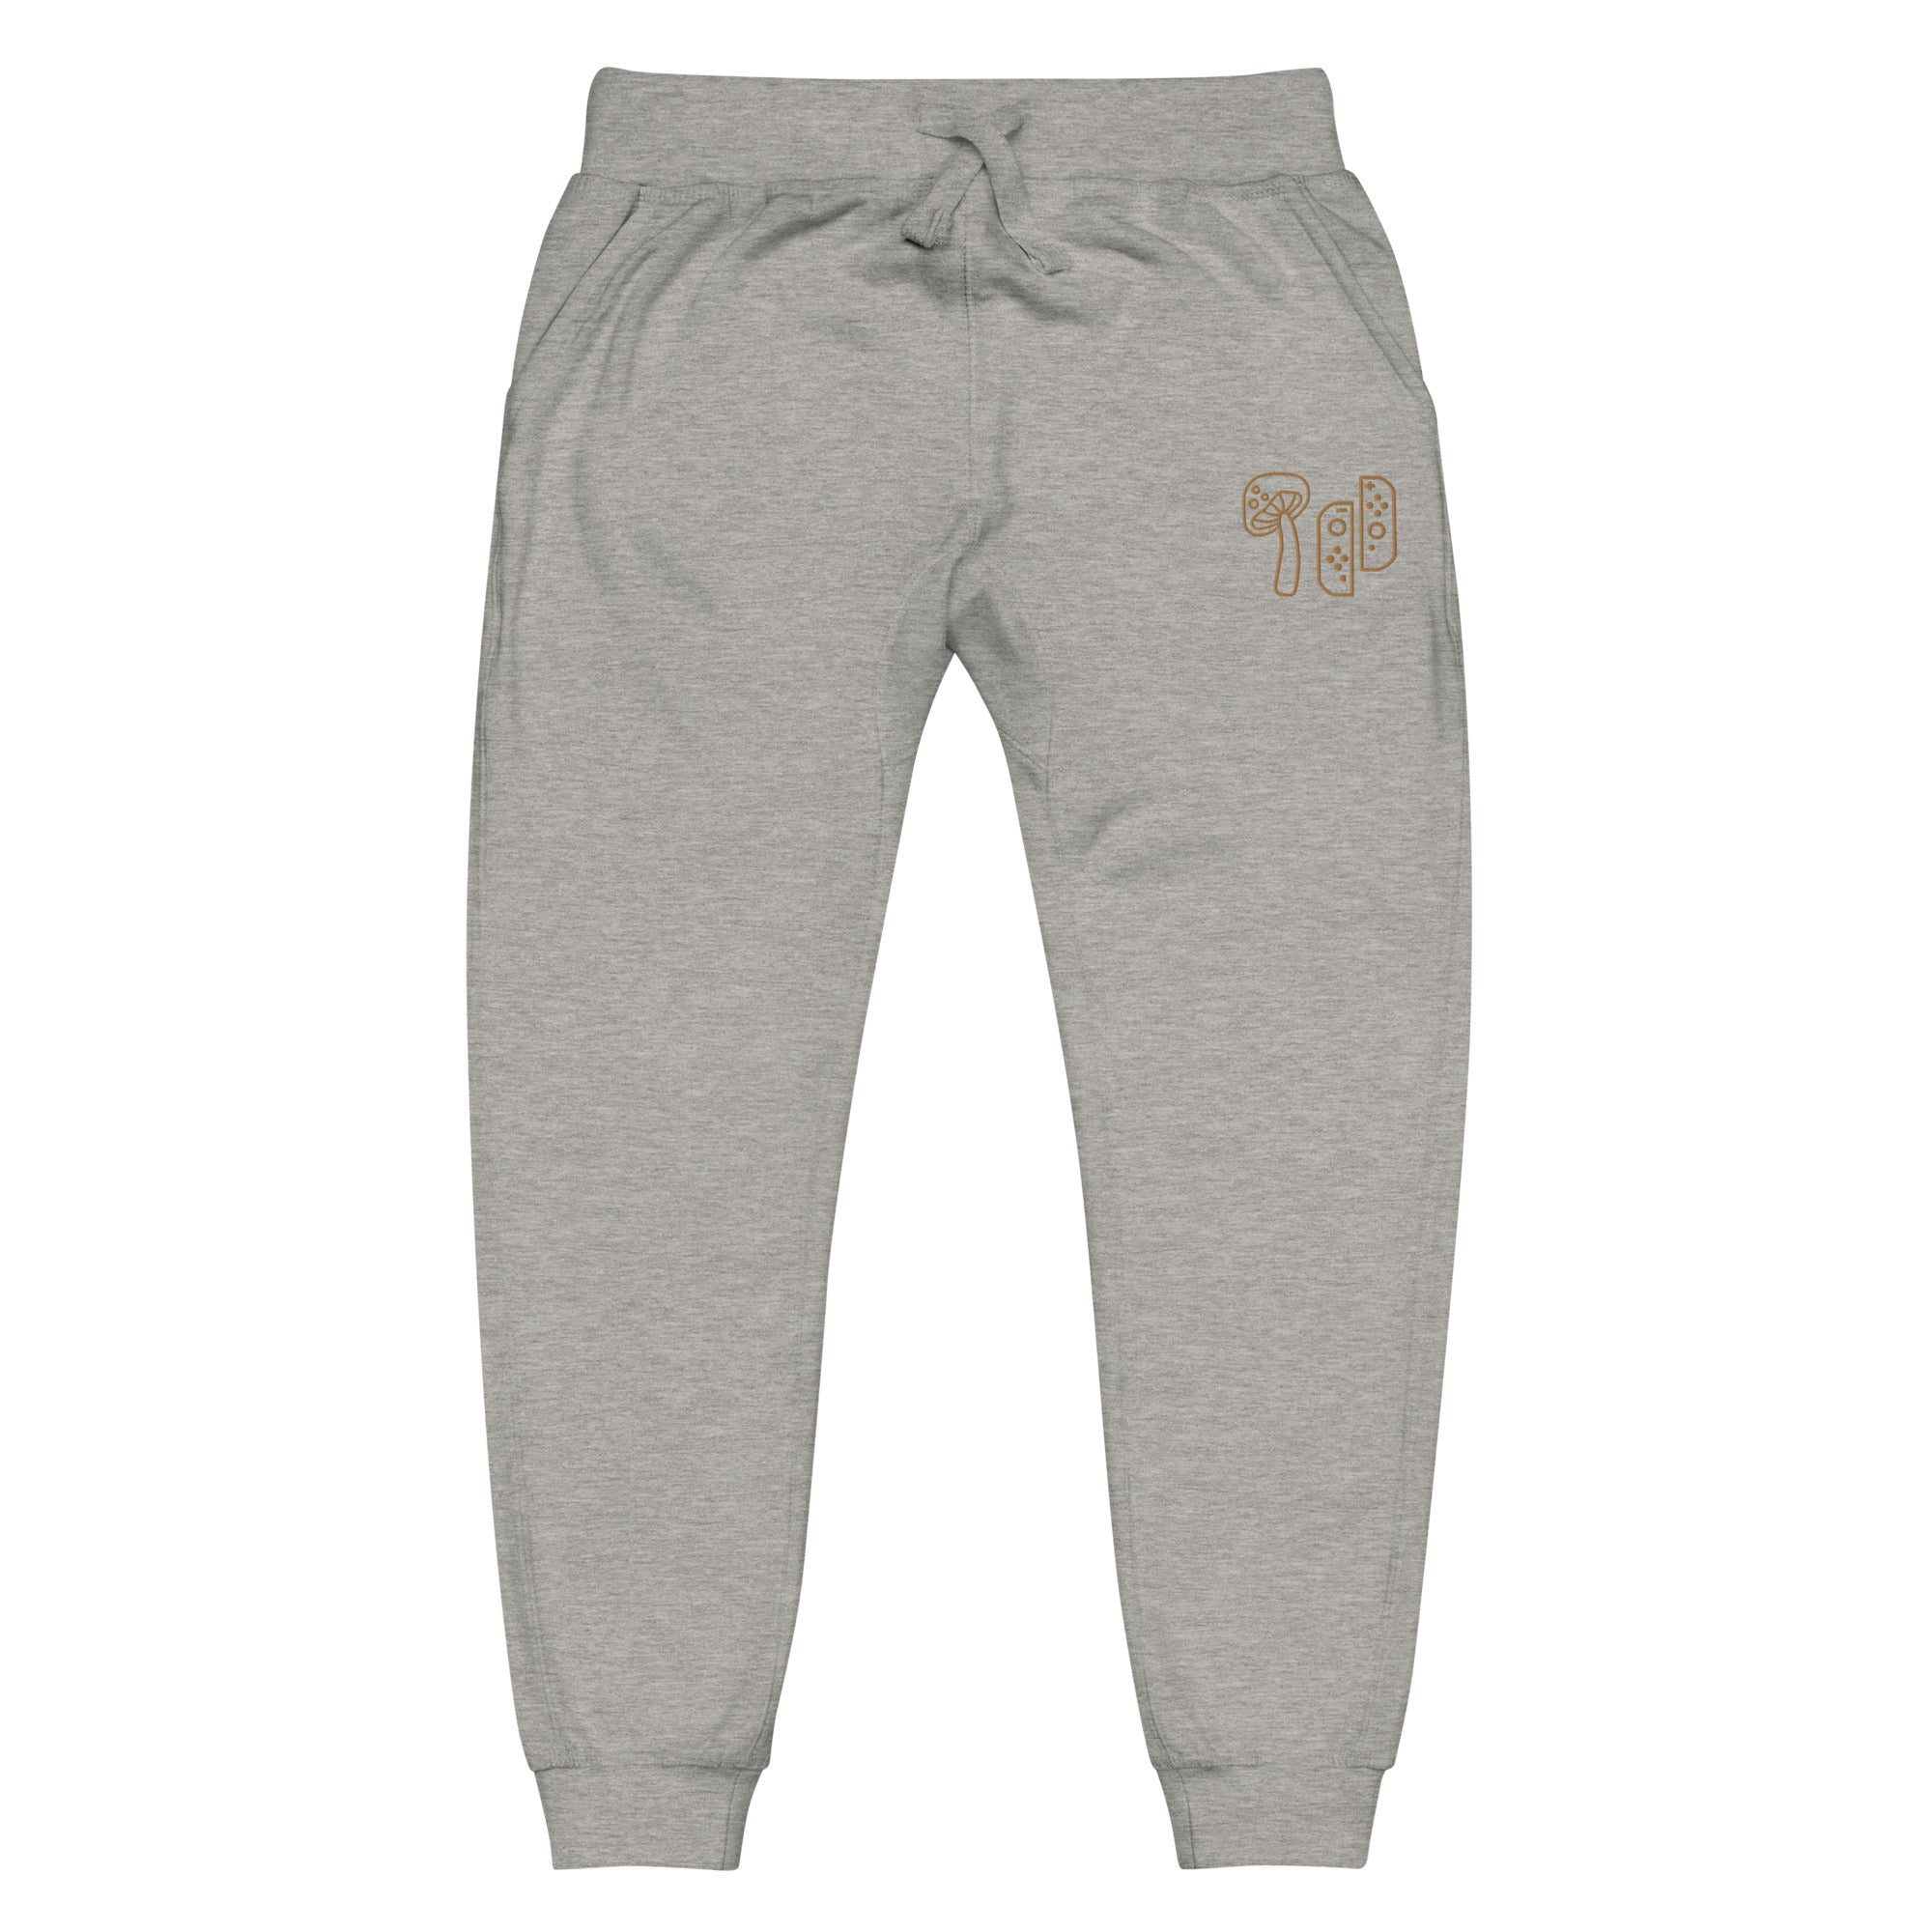 Mushroom & Switch | Unisex fleece sweatpants | Cozy Gamer Threads and Thistles Inventory Carbon Grey XS 